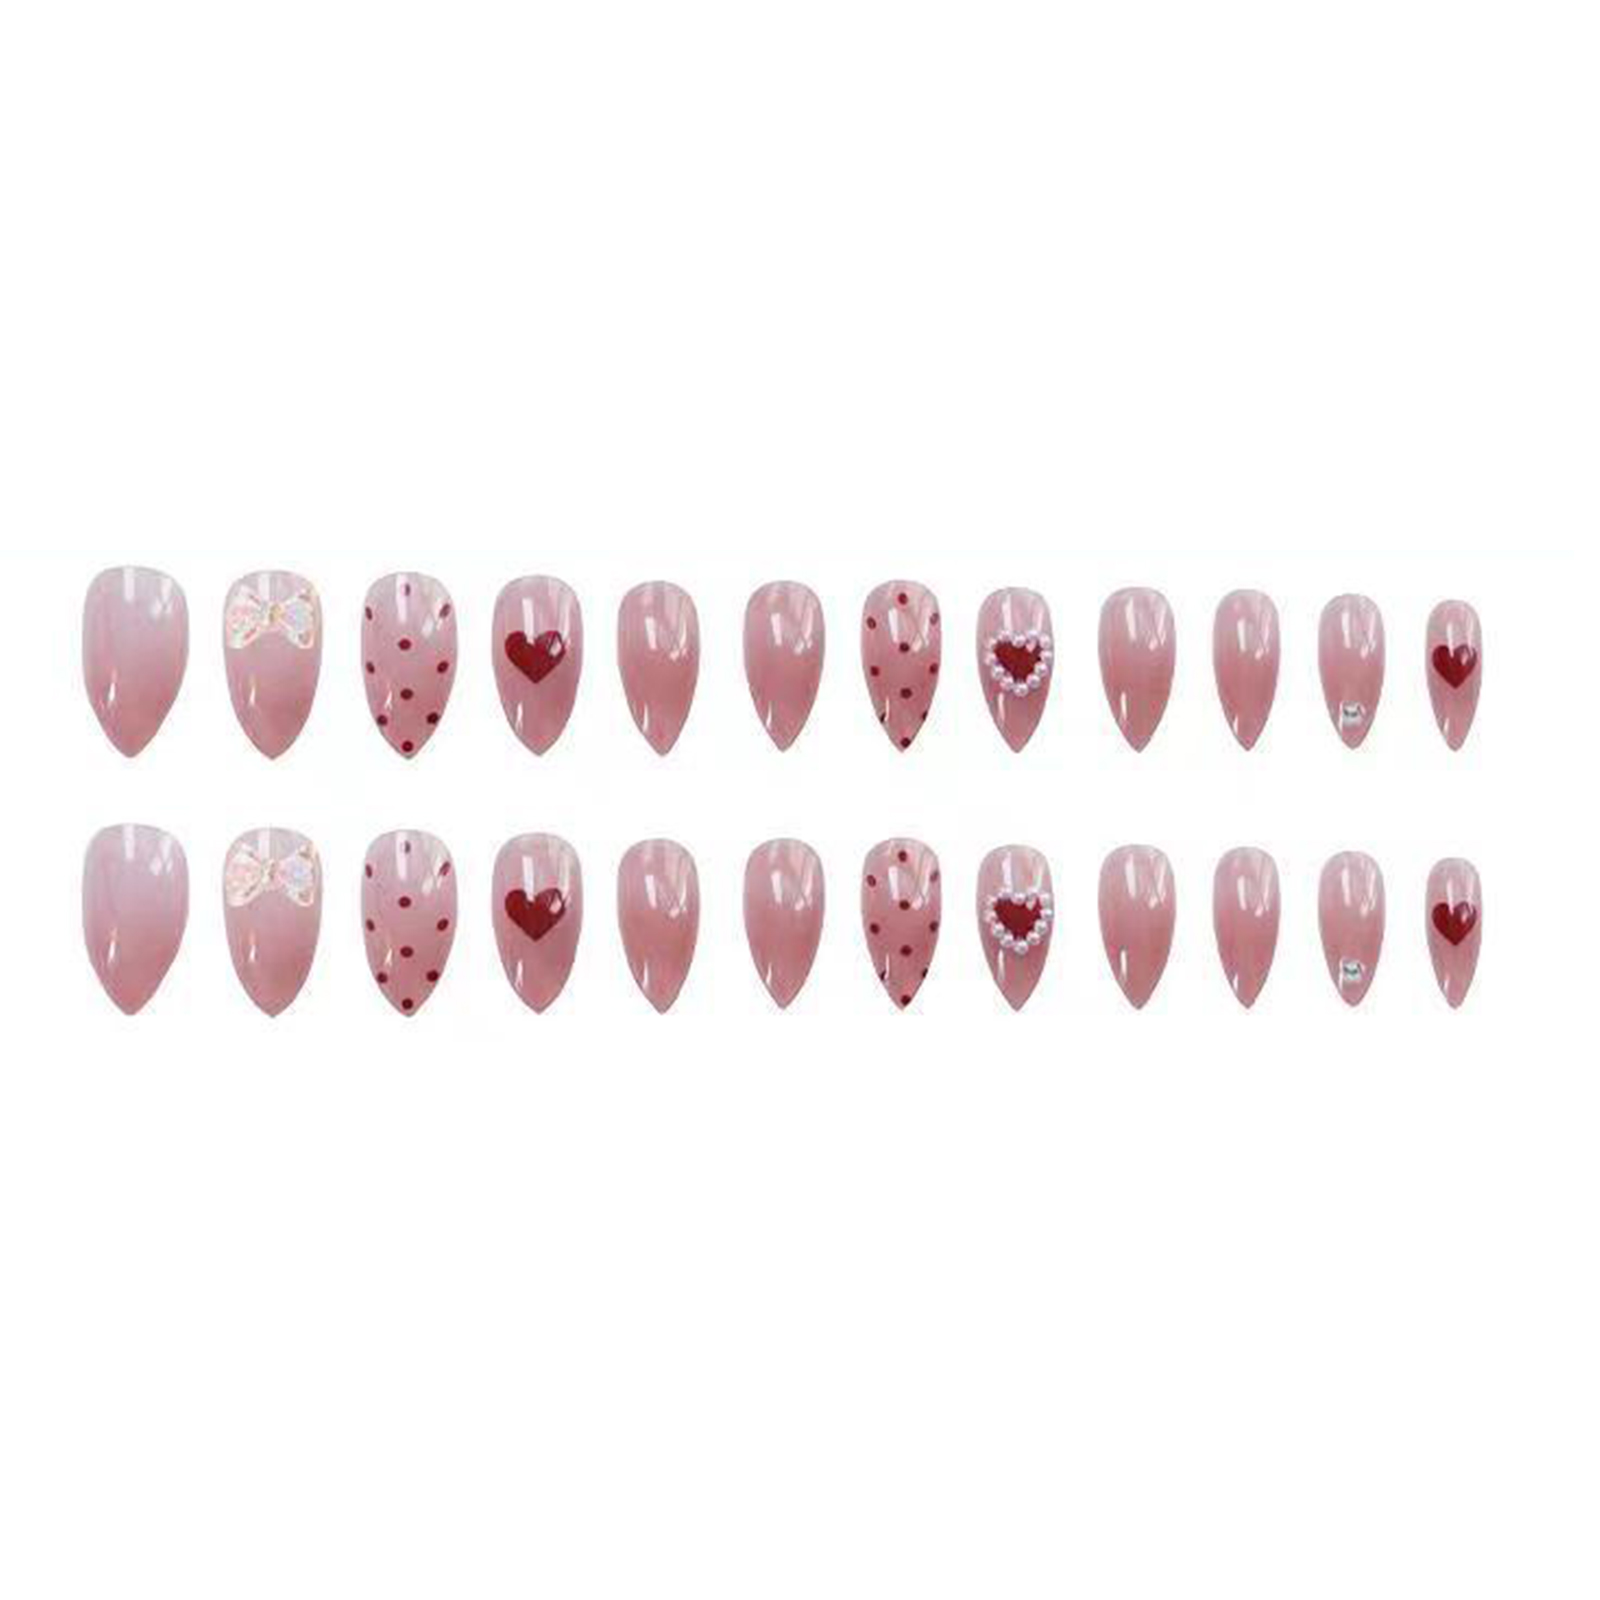 24pcs Pearl Wear Long Paragraph Fashion Manicure Patch False Nails Save Time Wearable Jelly Nail Patch TY